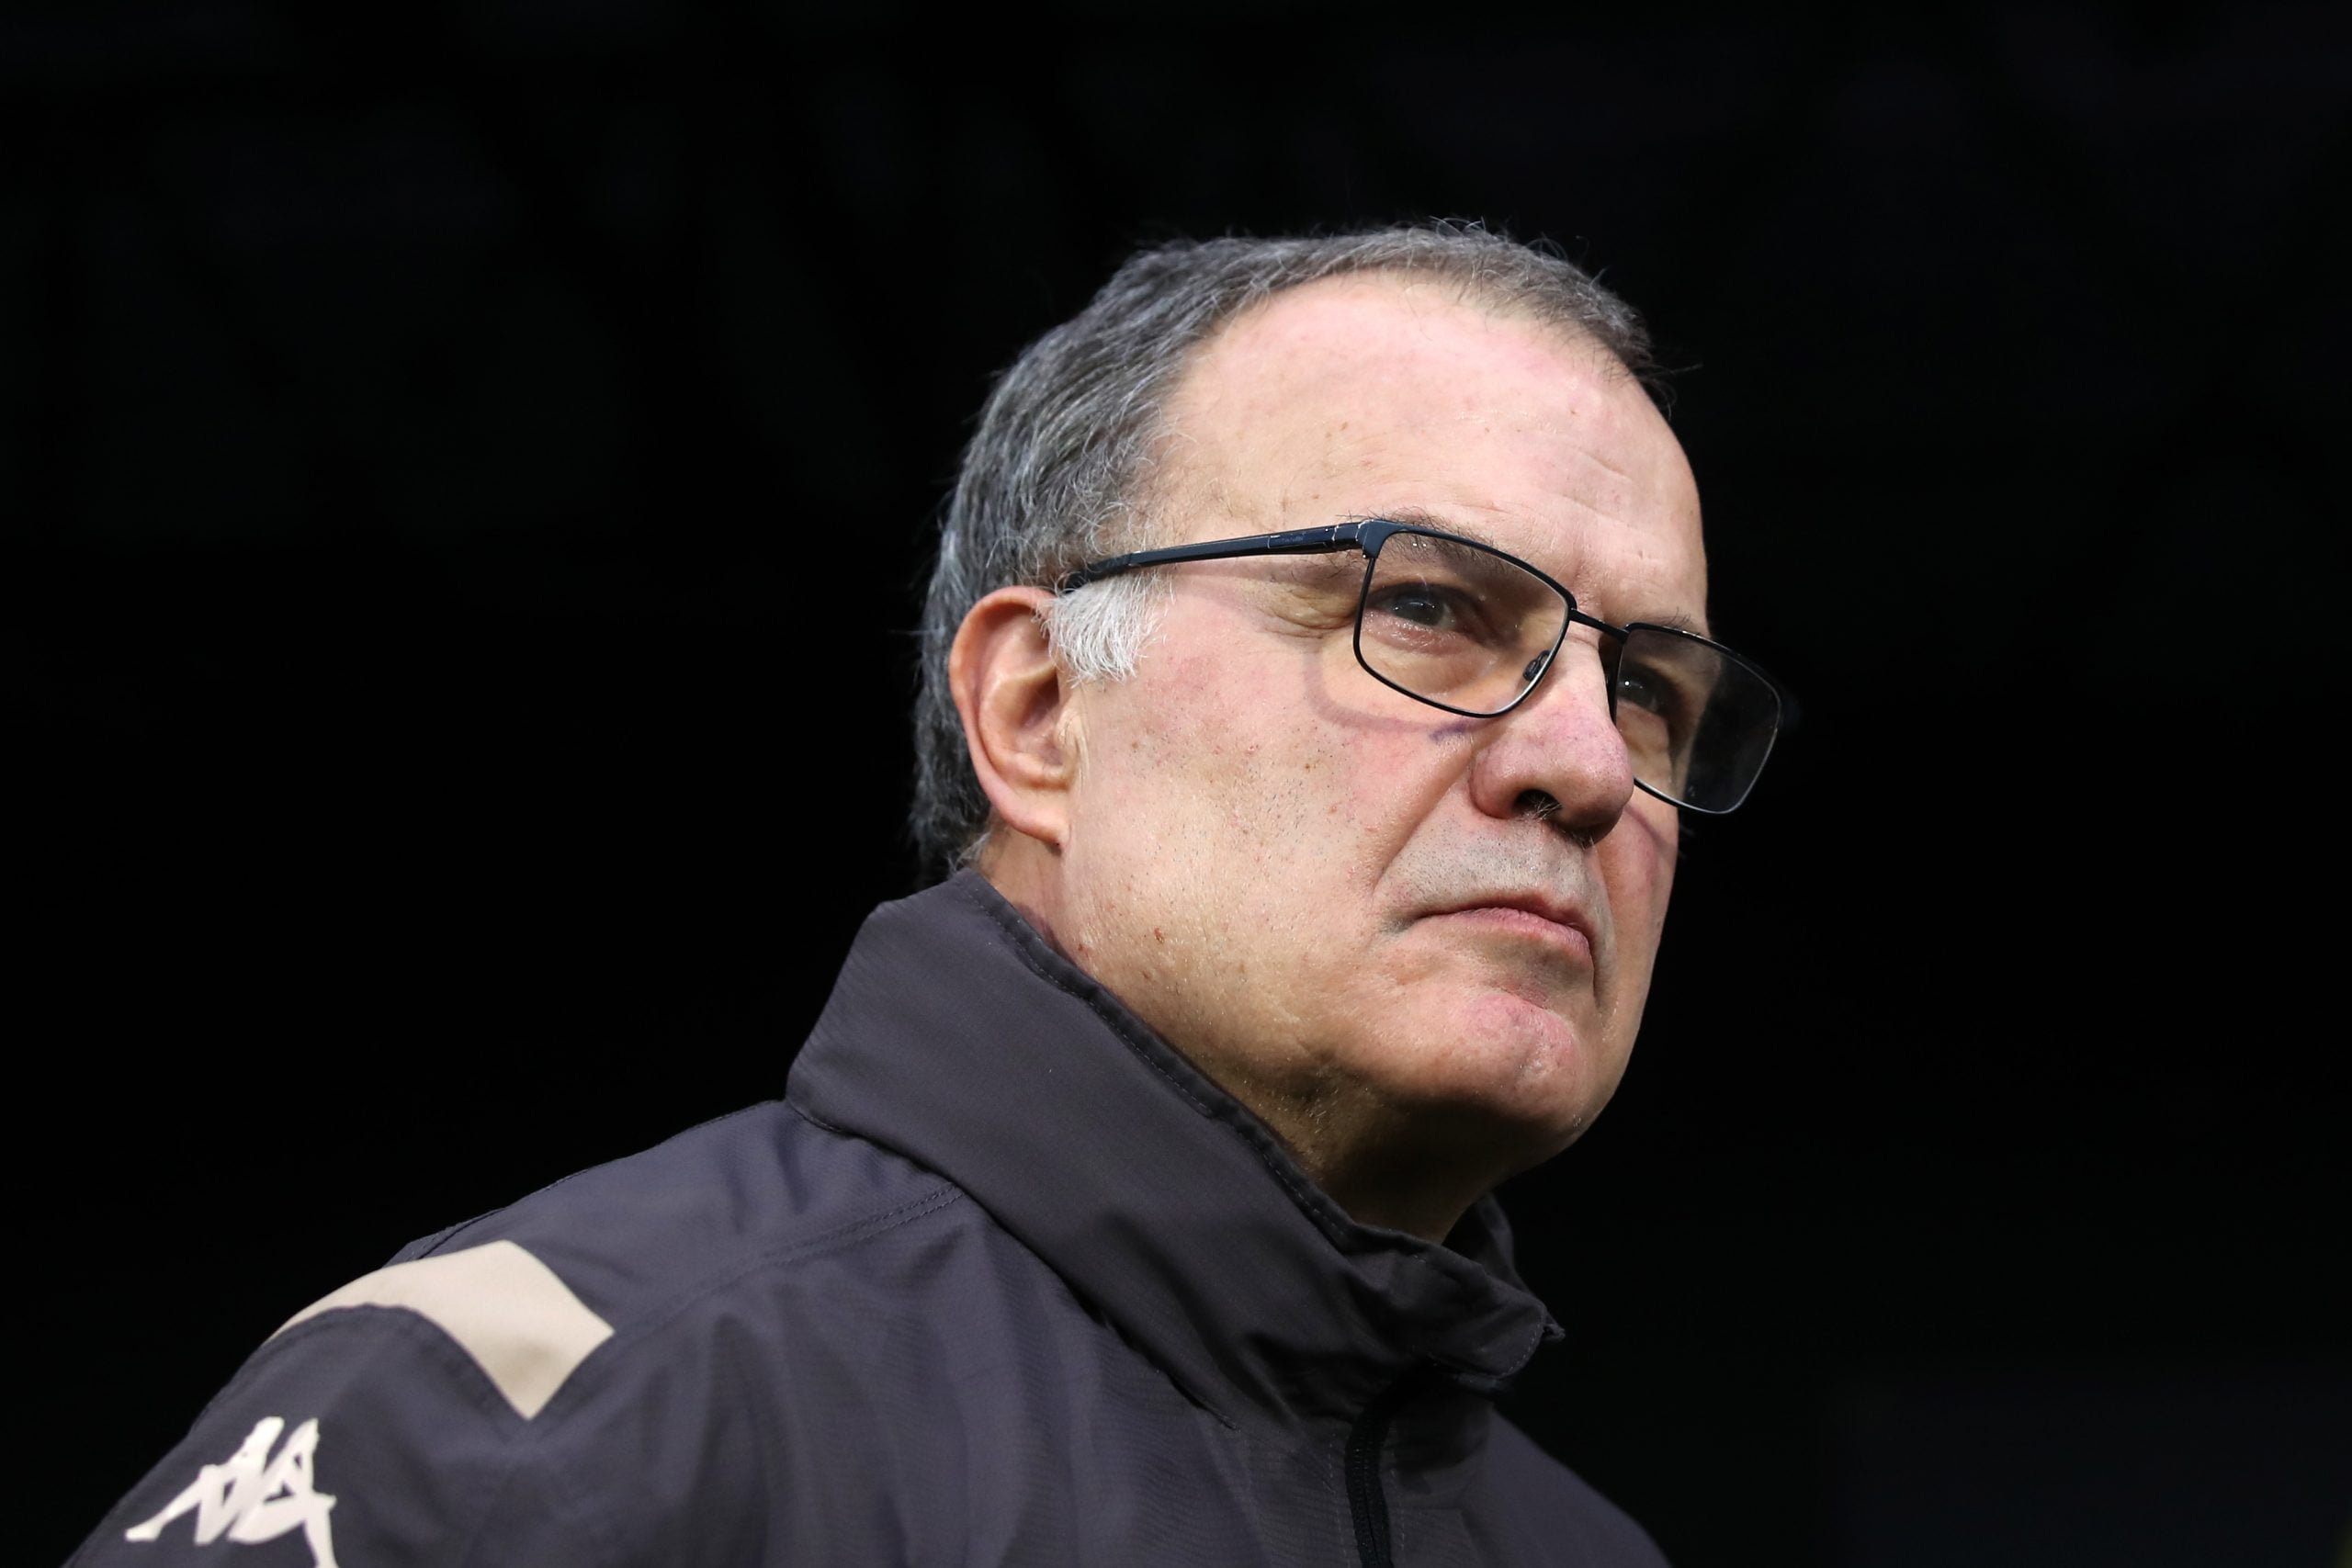 Leeds United are missing several players against Crystal Palace - how should Bielsa respond?